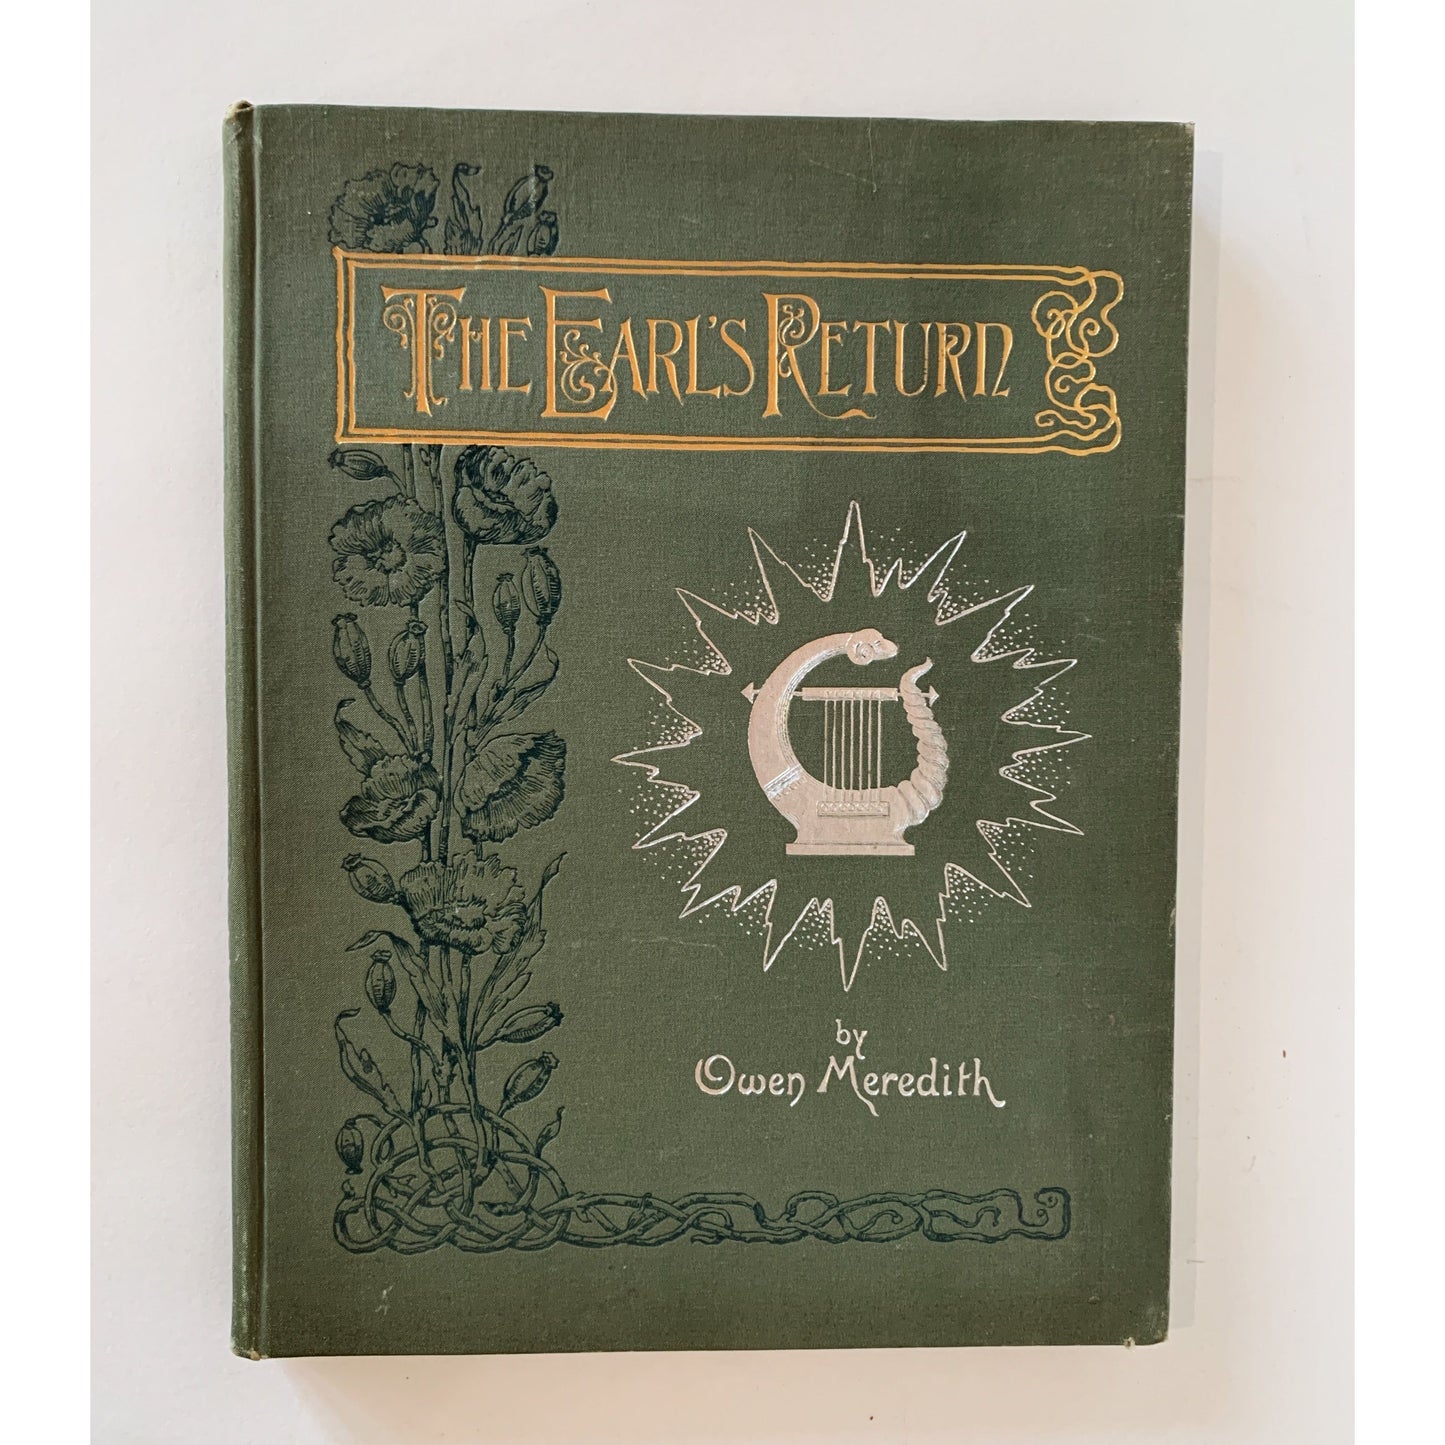 The Earl's Return, Owen Meredith, 1886 Illustrated Oversized Poetry Hardcover